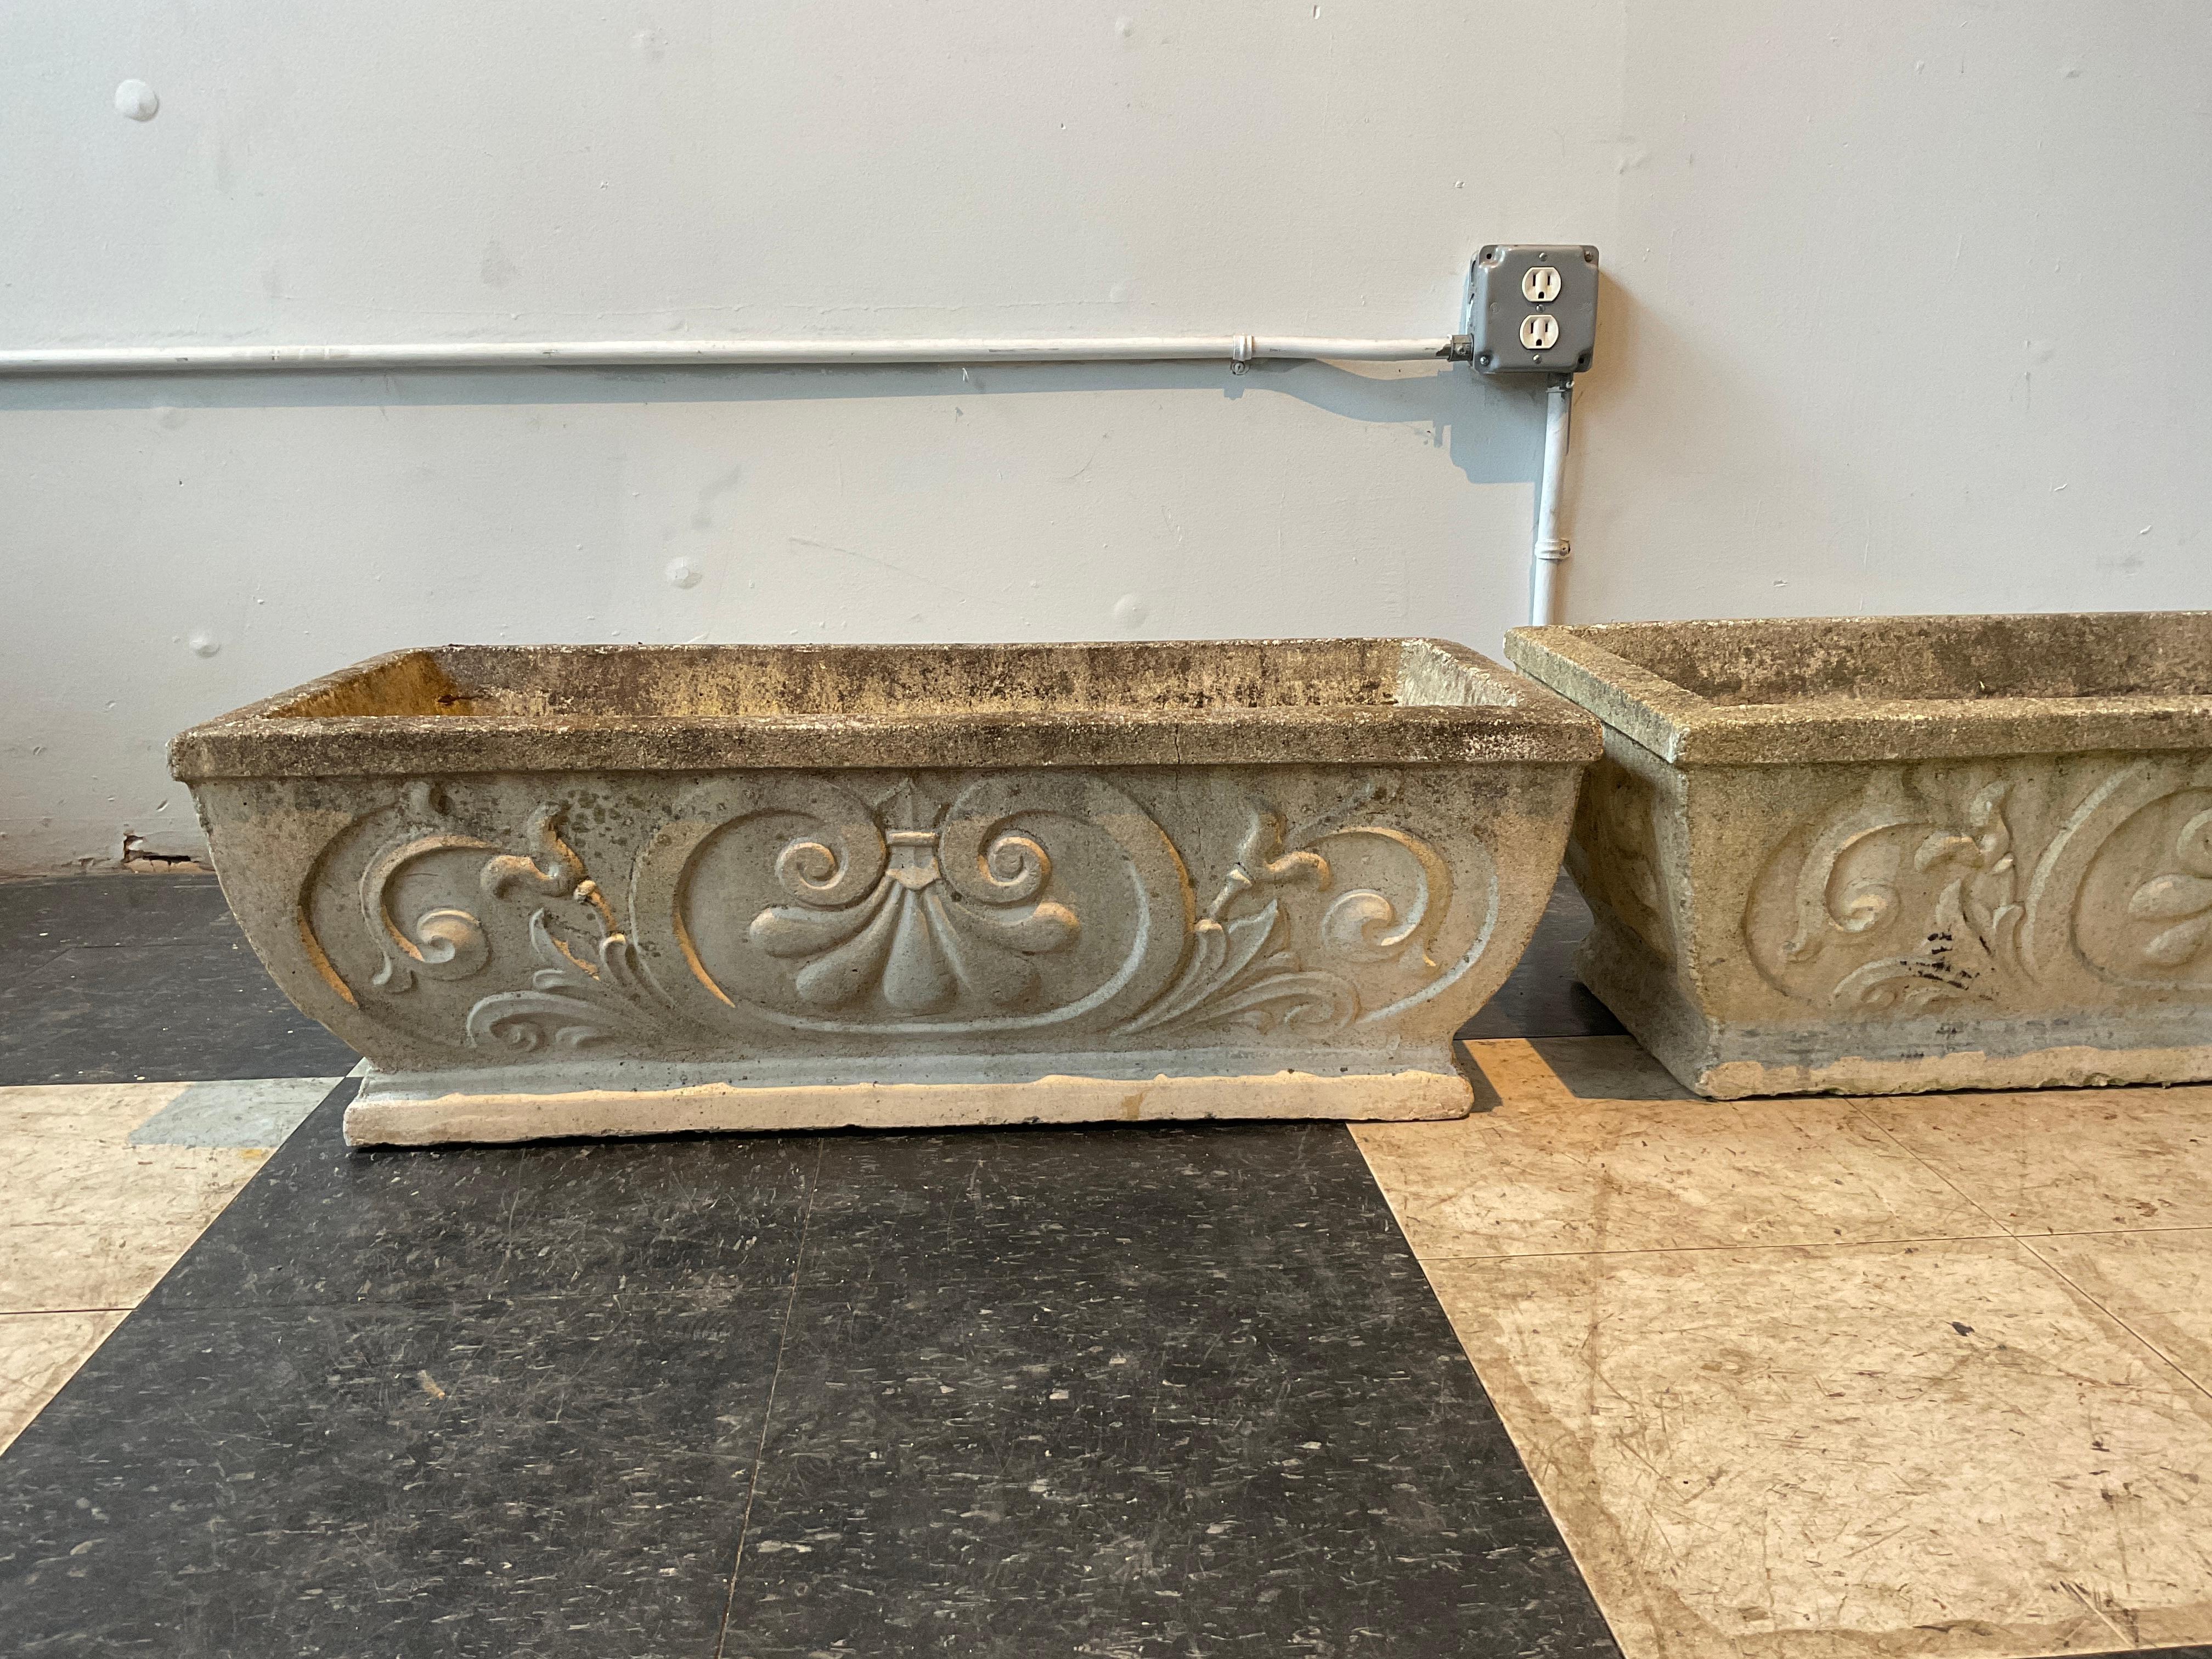 A pair of 1950s concrete planters. There are 4 pairs available. The price is 975 per pair.